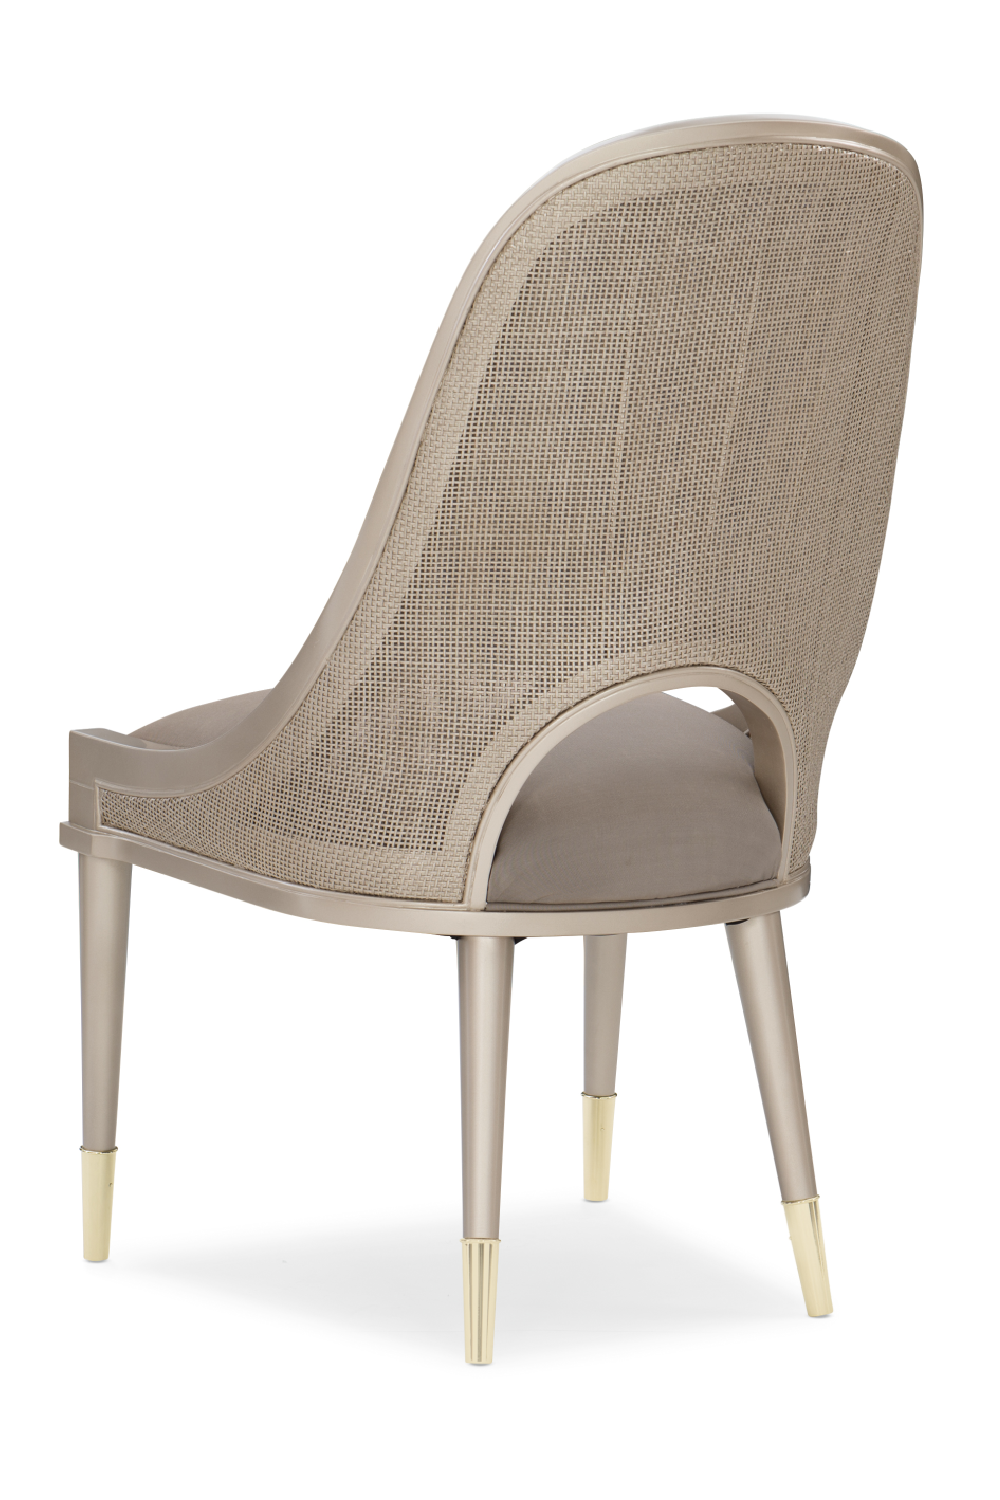 Cut-Out Back Dining Chair | Caracole Cane I Join You | Oroa.com